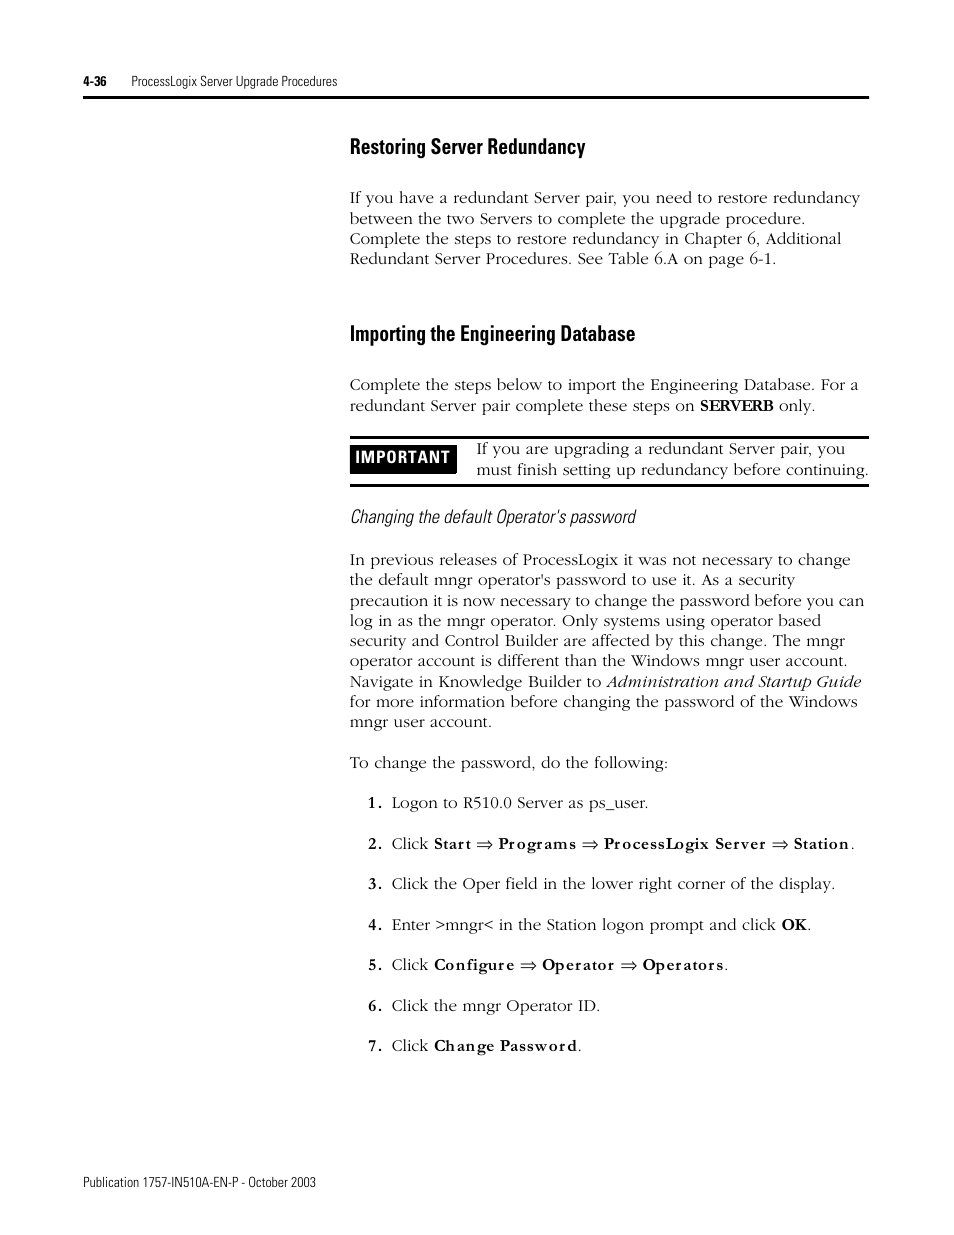 Restoring server redundancy, Importing the engineering database | Rockwell Automation 1757-SWKIT5100 ProcessLogix R510.0 Installation and Upgrade Guide User Manual | Page 120 / 271